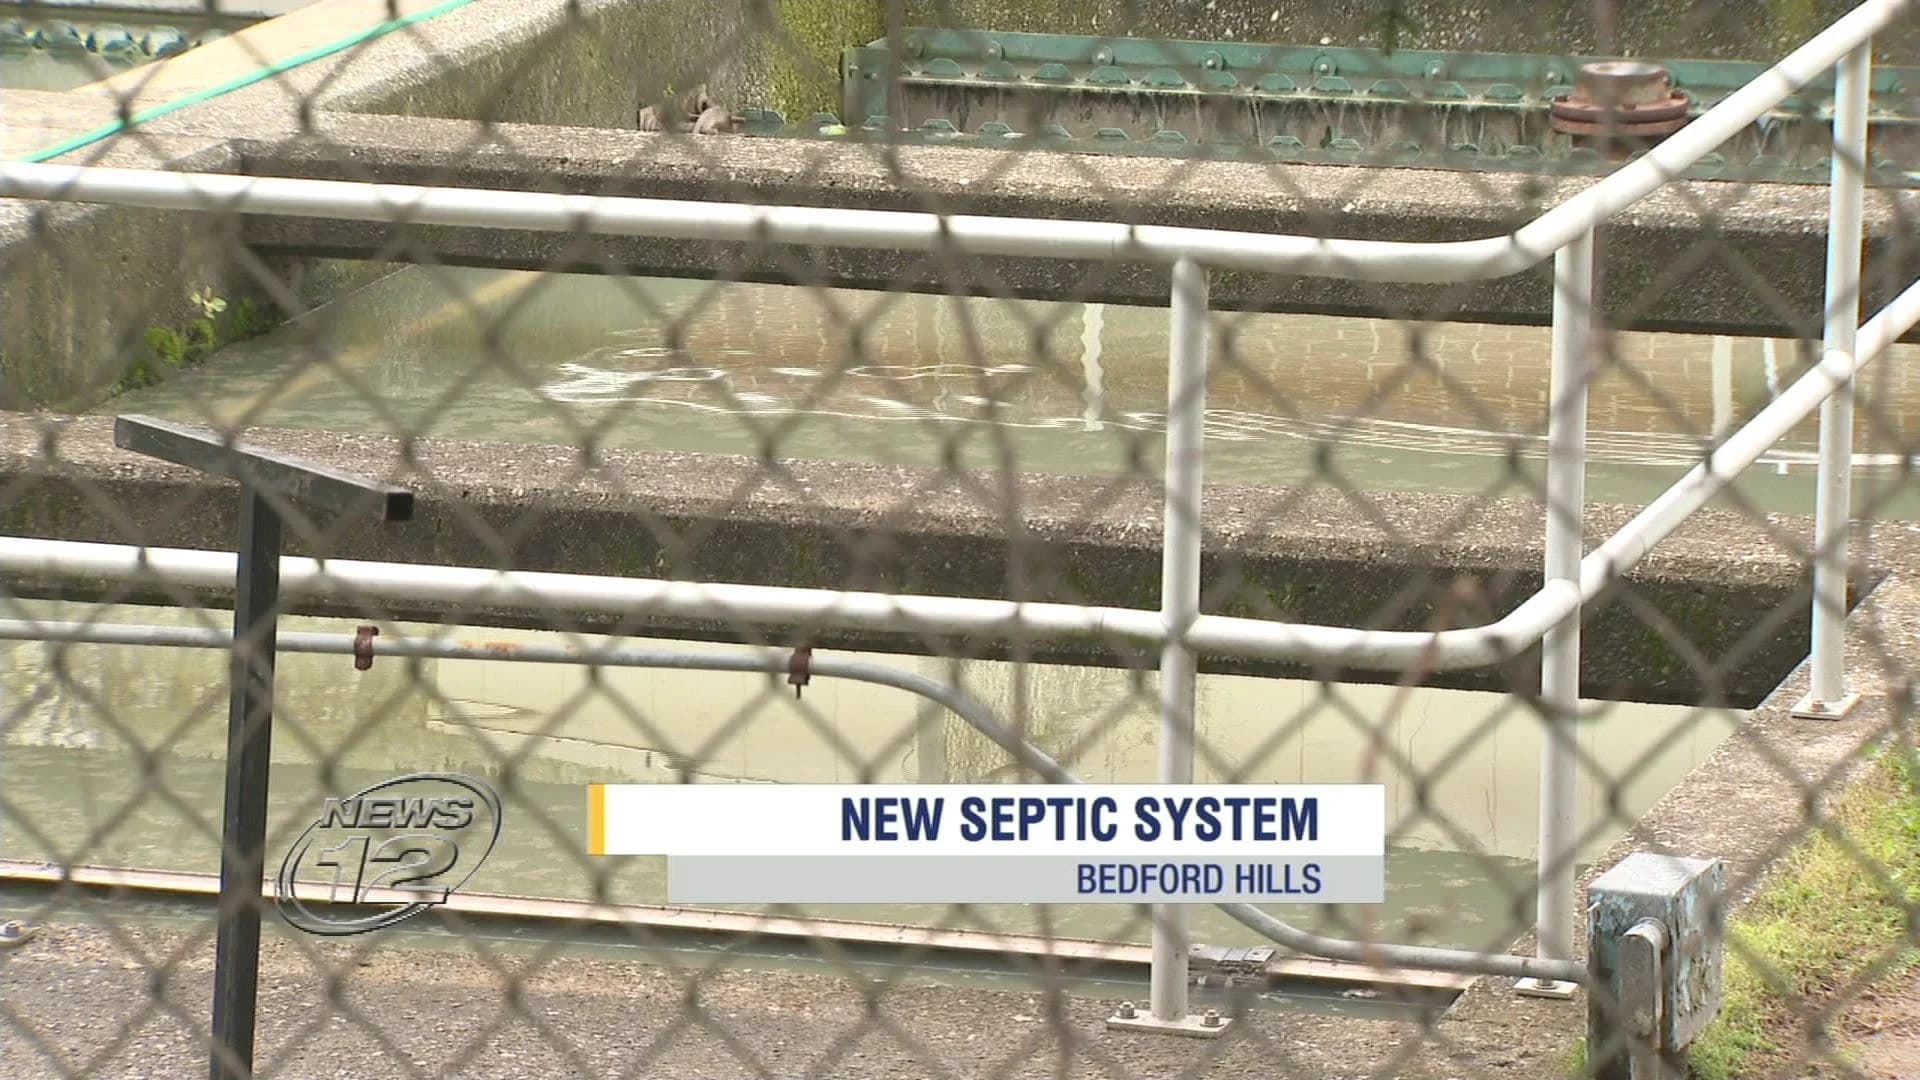 Plans for new sewer system in Bedford Hills underway